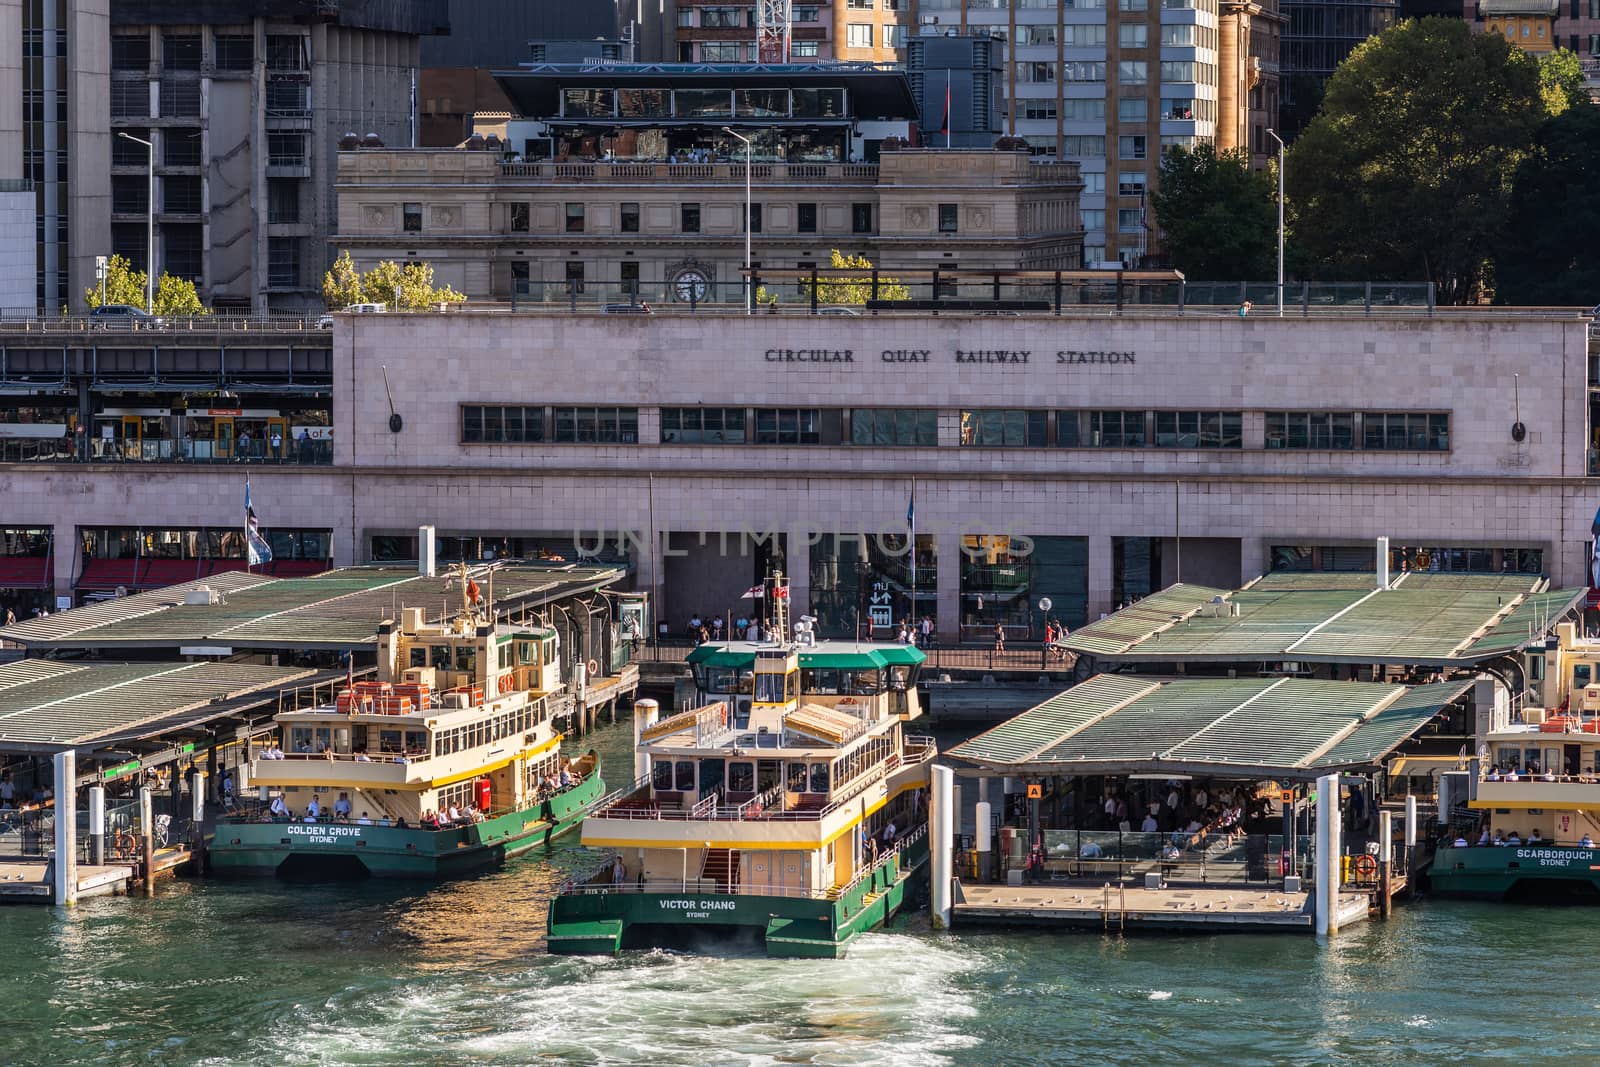 Closeup of Ferry terminal and Circular Quay Railway station, Syd by Claudine